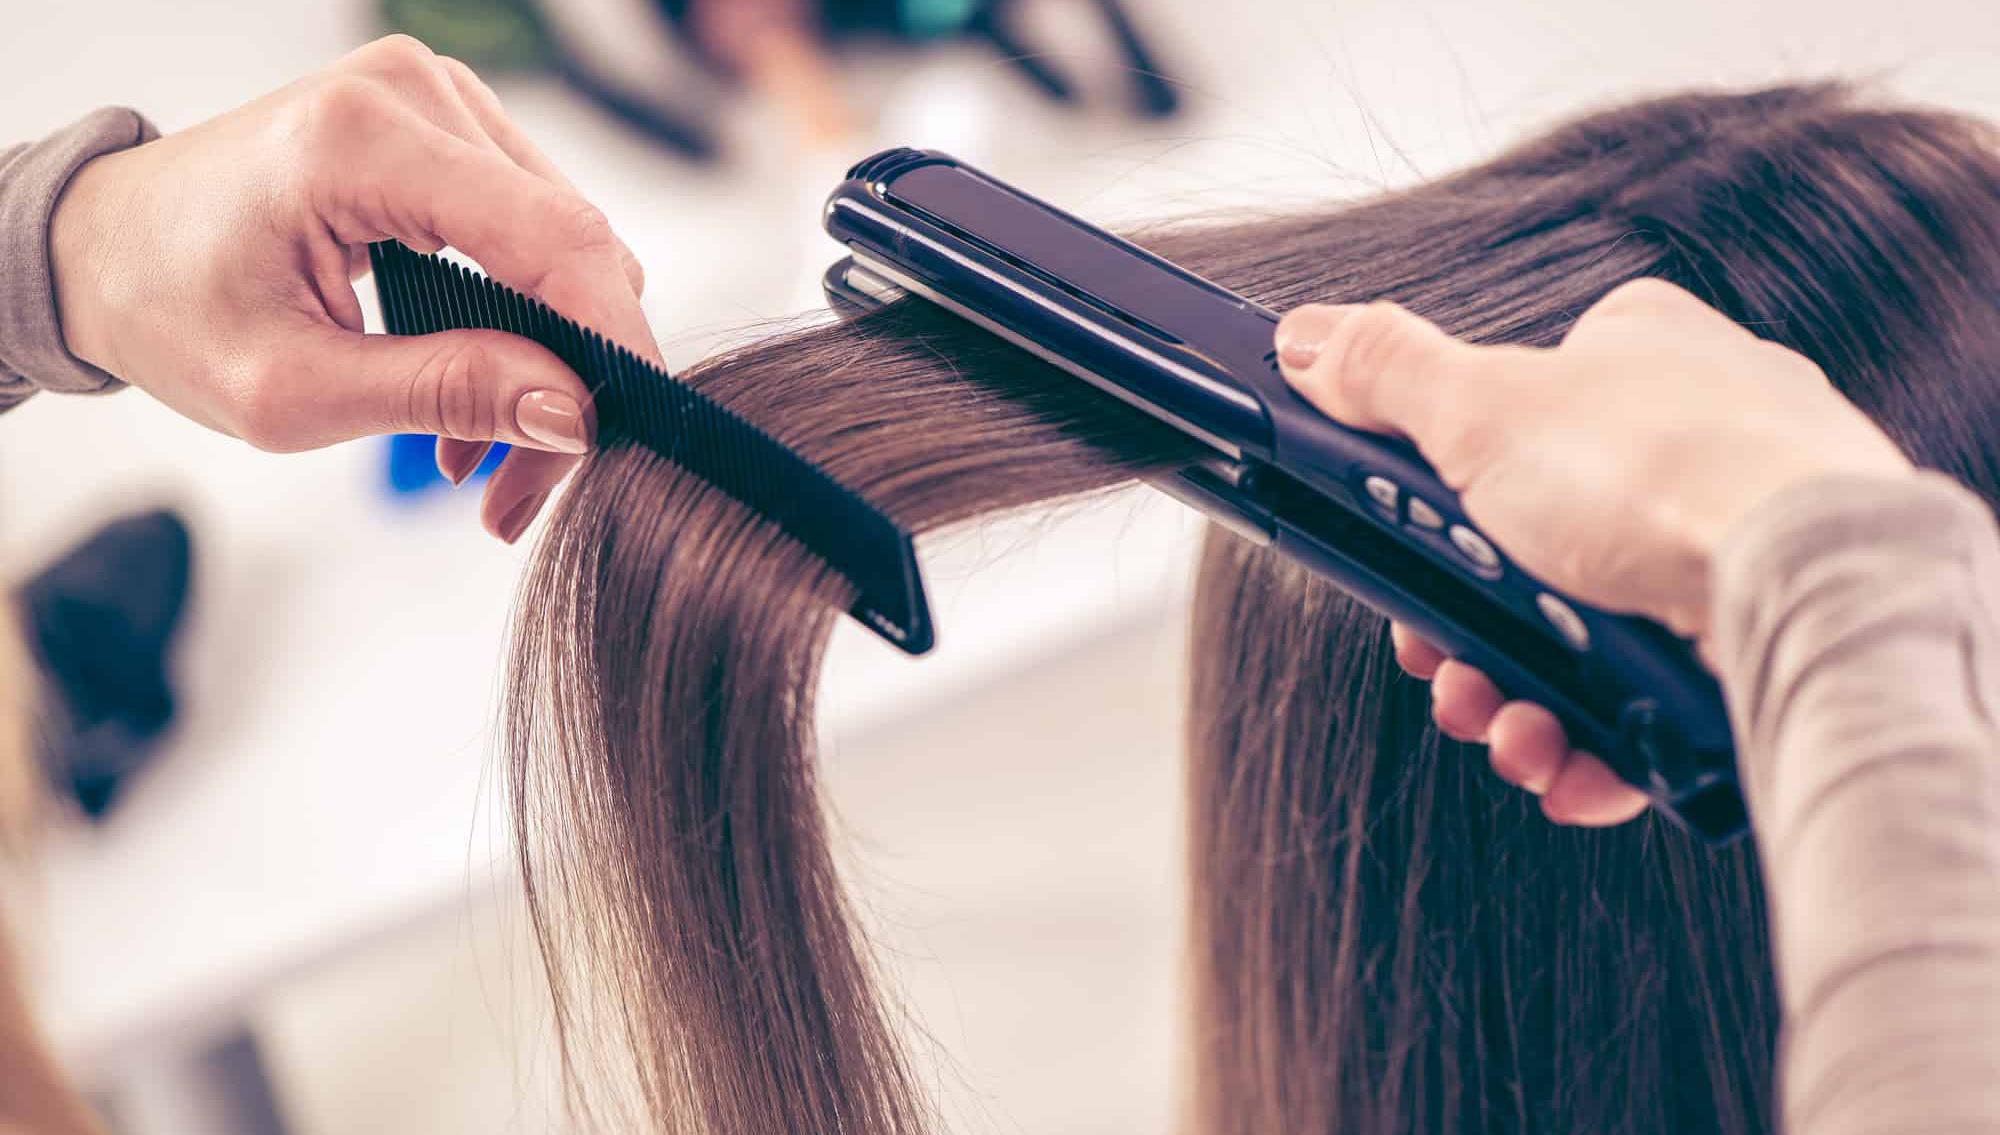 <span class="spa-indicator">Sponsored</span> The best hair straighteners in Canada